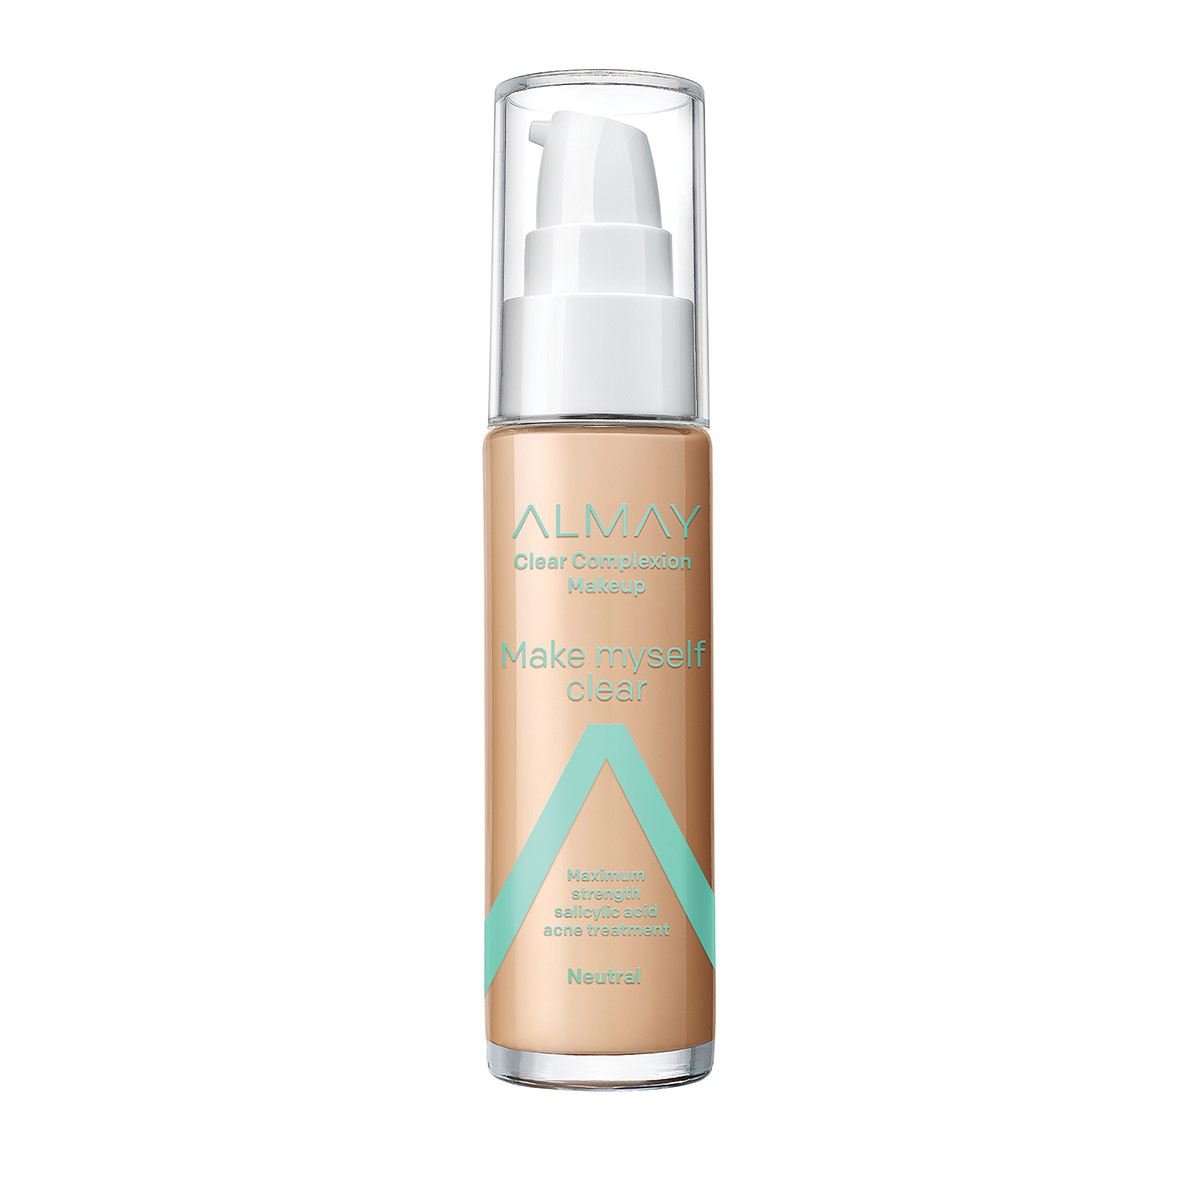 Base de Maquillaje Clear Complexion Make Up Neutral Almay